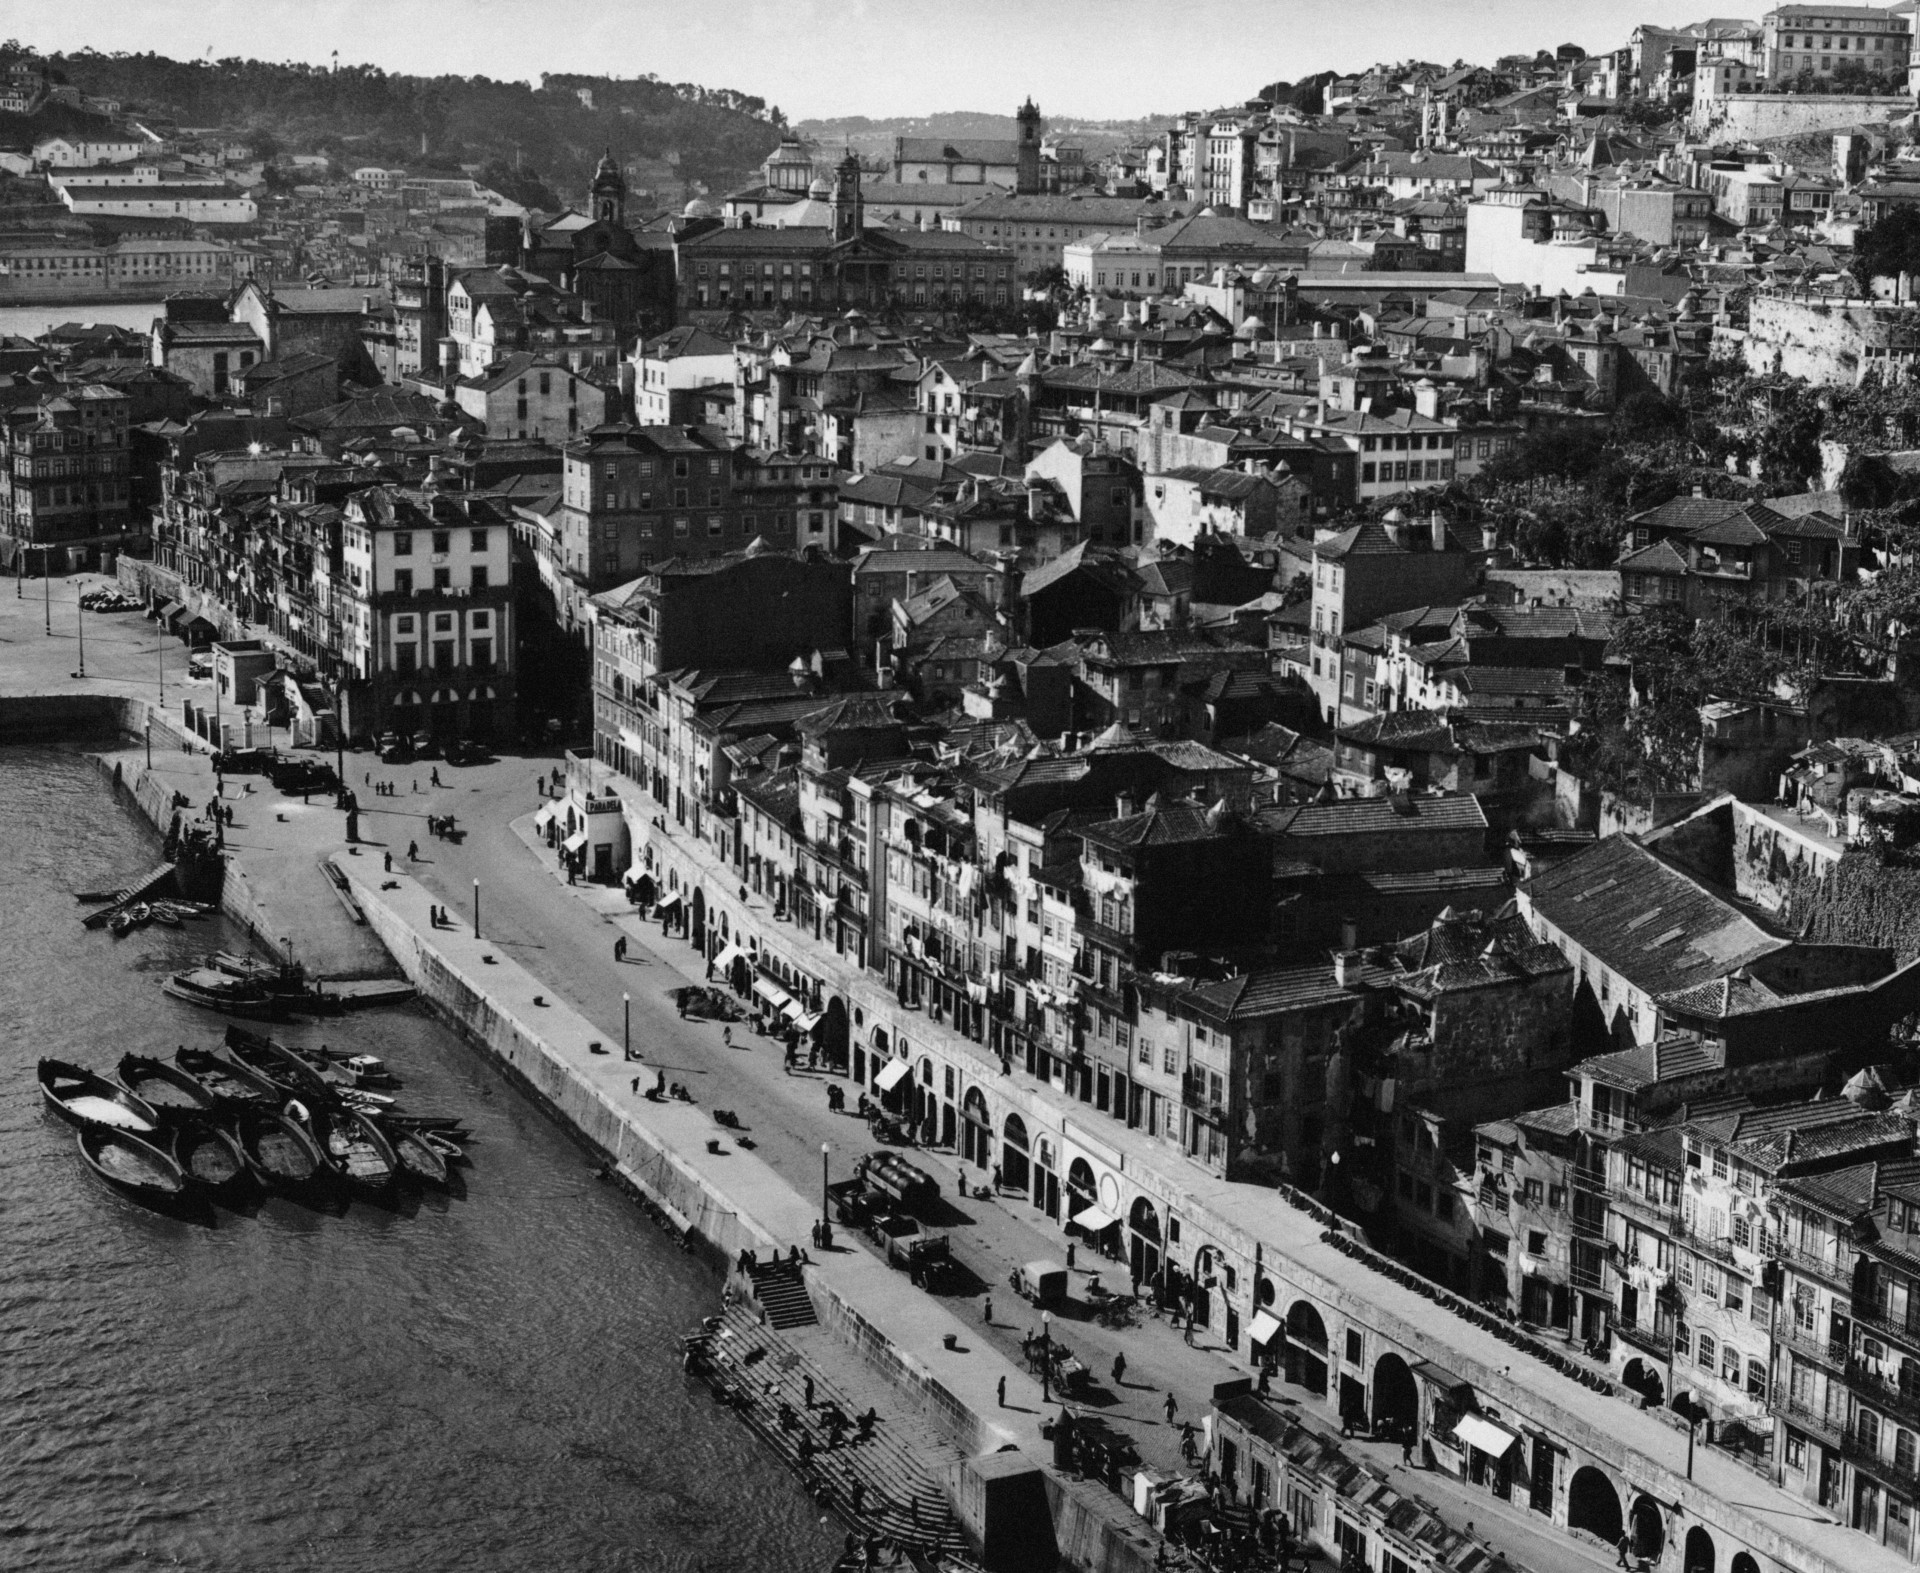 The famous city in the north of Portugal seen in the 1930s.<p><a href="https://www.msn.com/en-us/community/channel/vid-7xx8mnucu55yw63we9va2gwr7uihbxwc68fxqp25x6tg4ftibpra?cvid=94631541bc0f4f89bfd59158d696ad7e">Follow us and access great exclusive content every day</a></p>